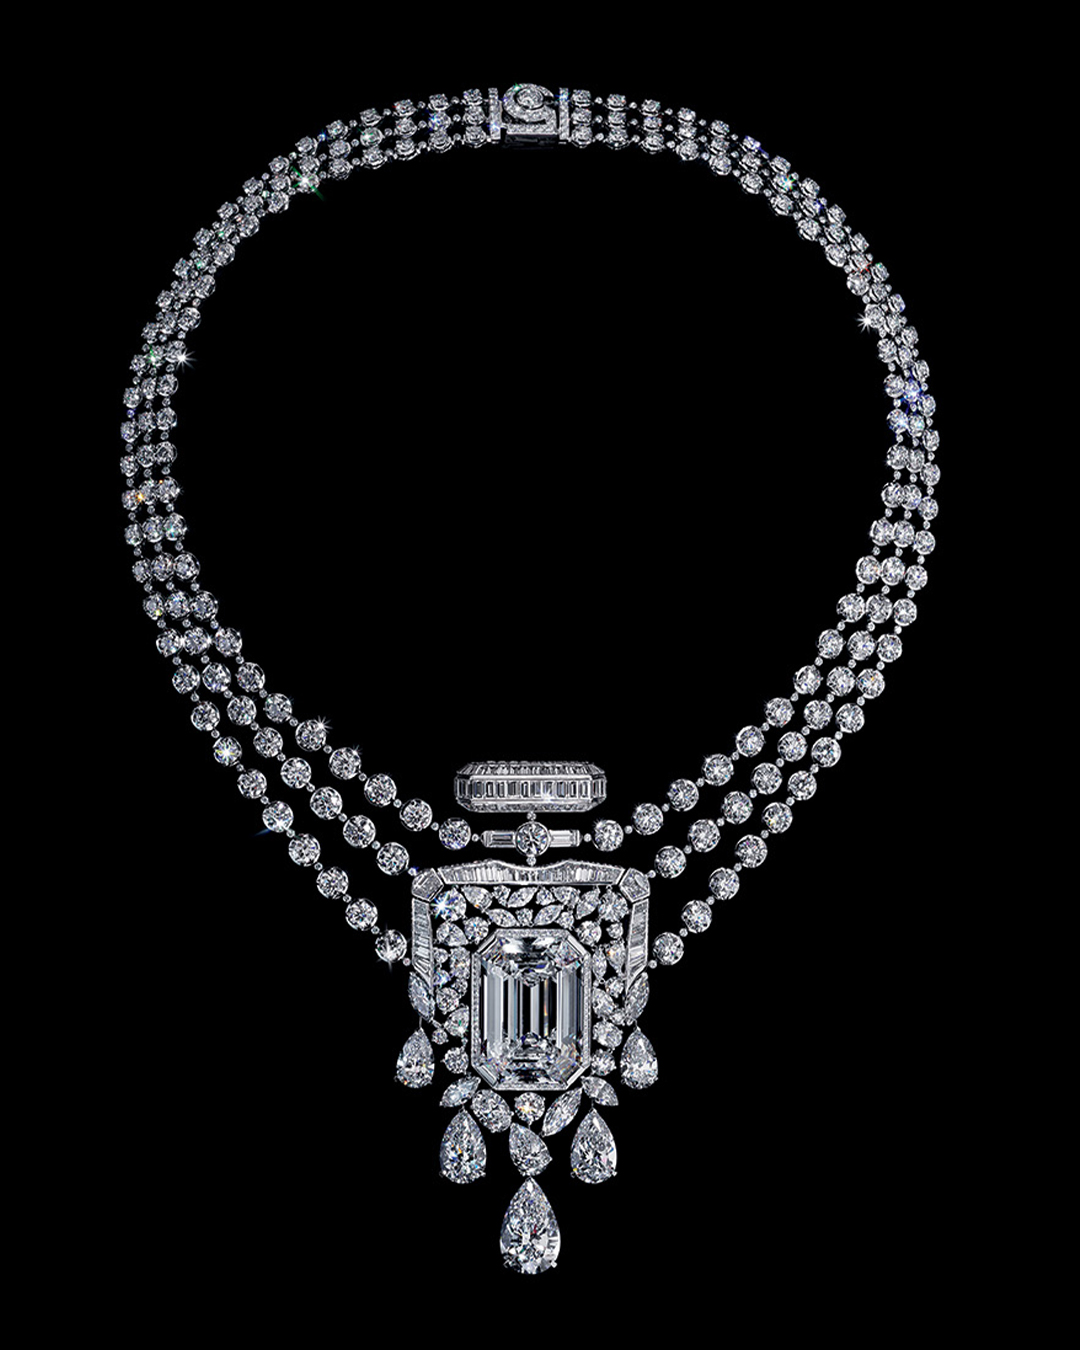 Chanel Jewellery Turns To Natural Diamonds For The New Collection